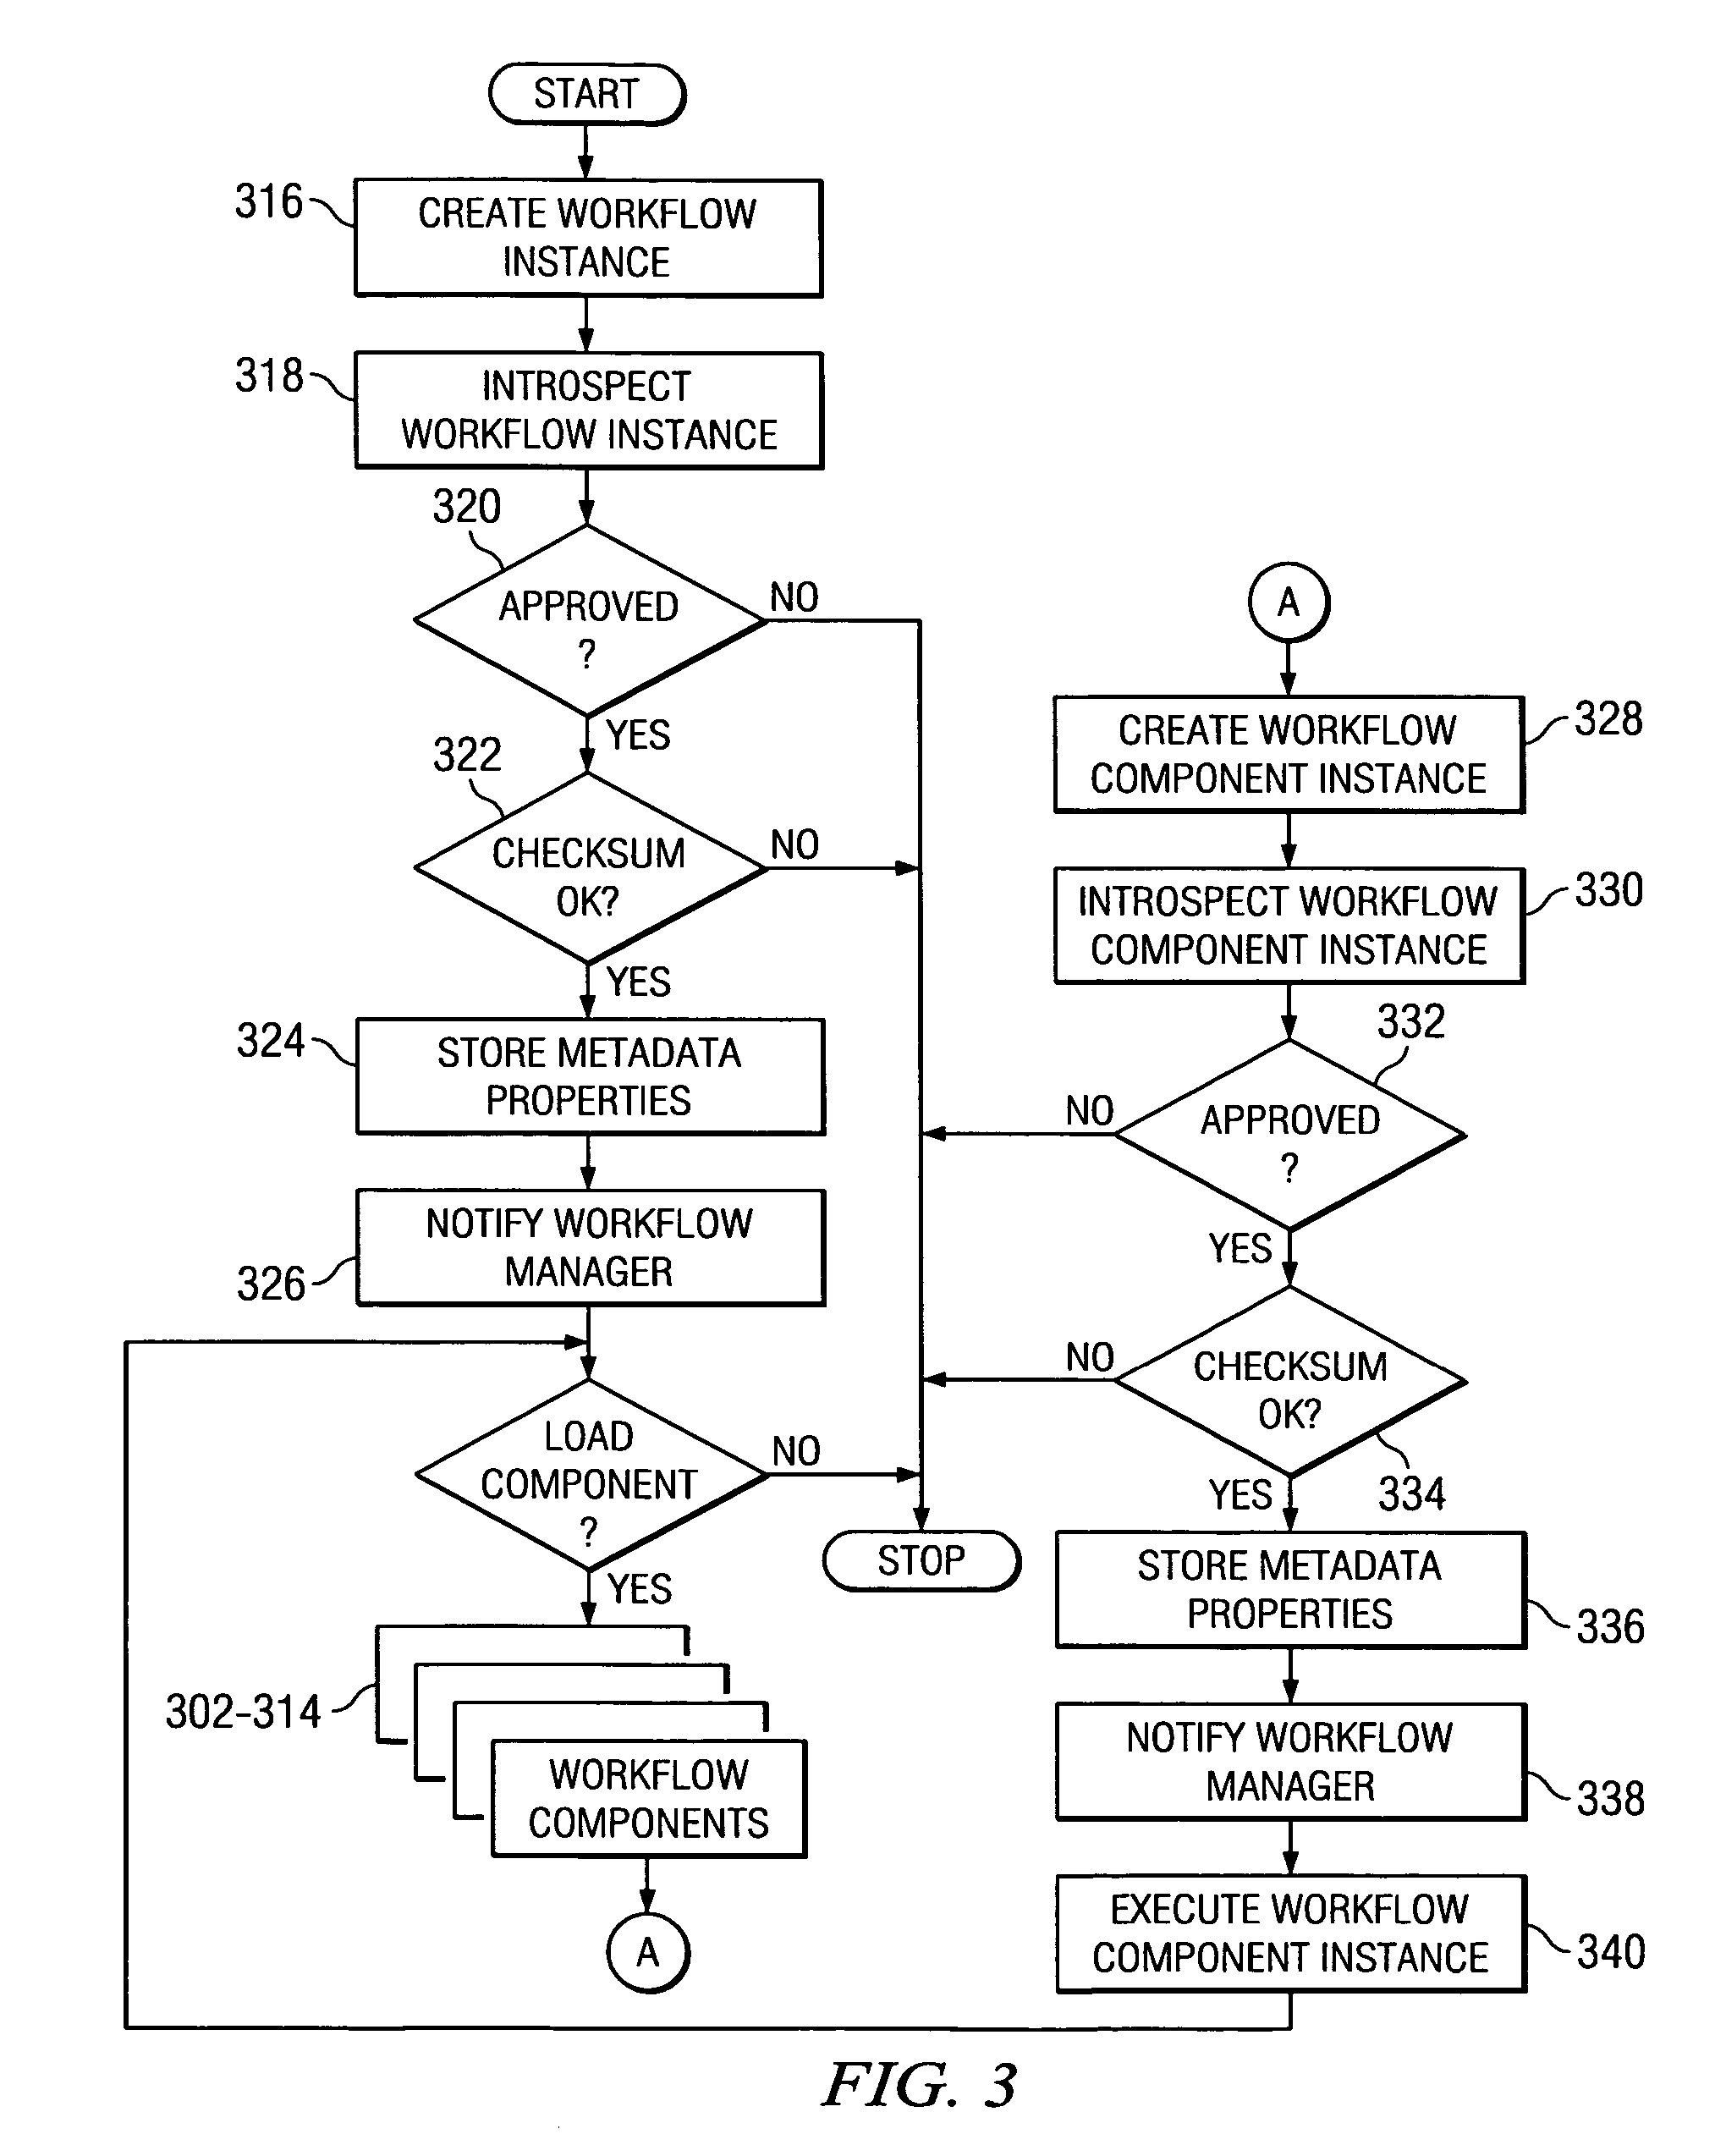 Workflow application having linked workflow components